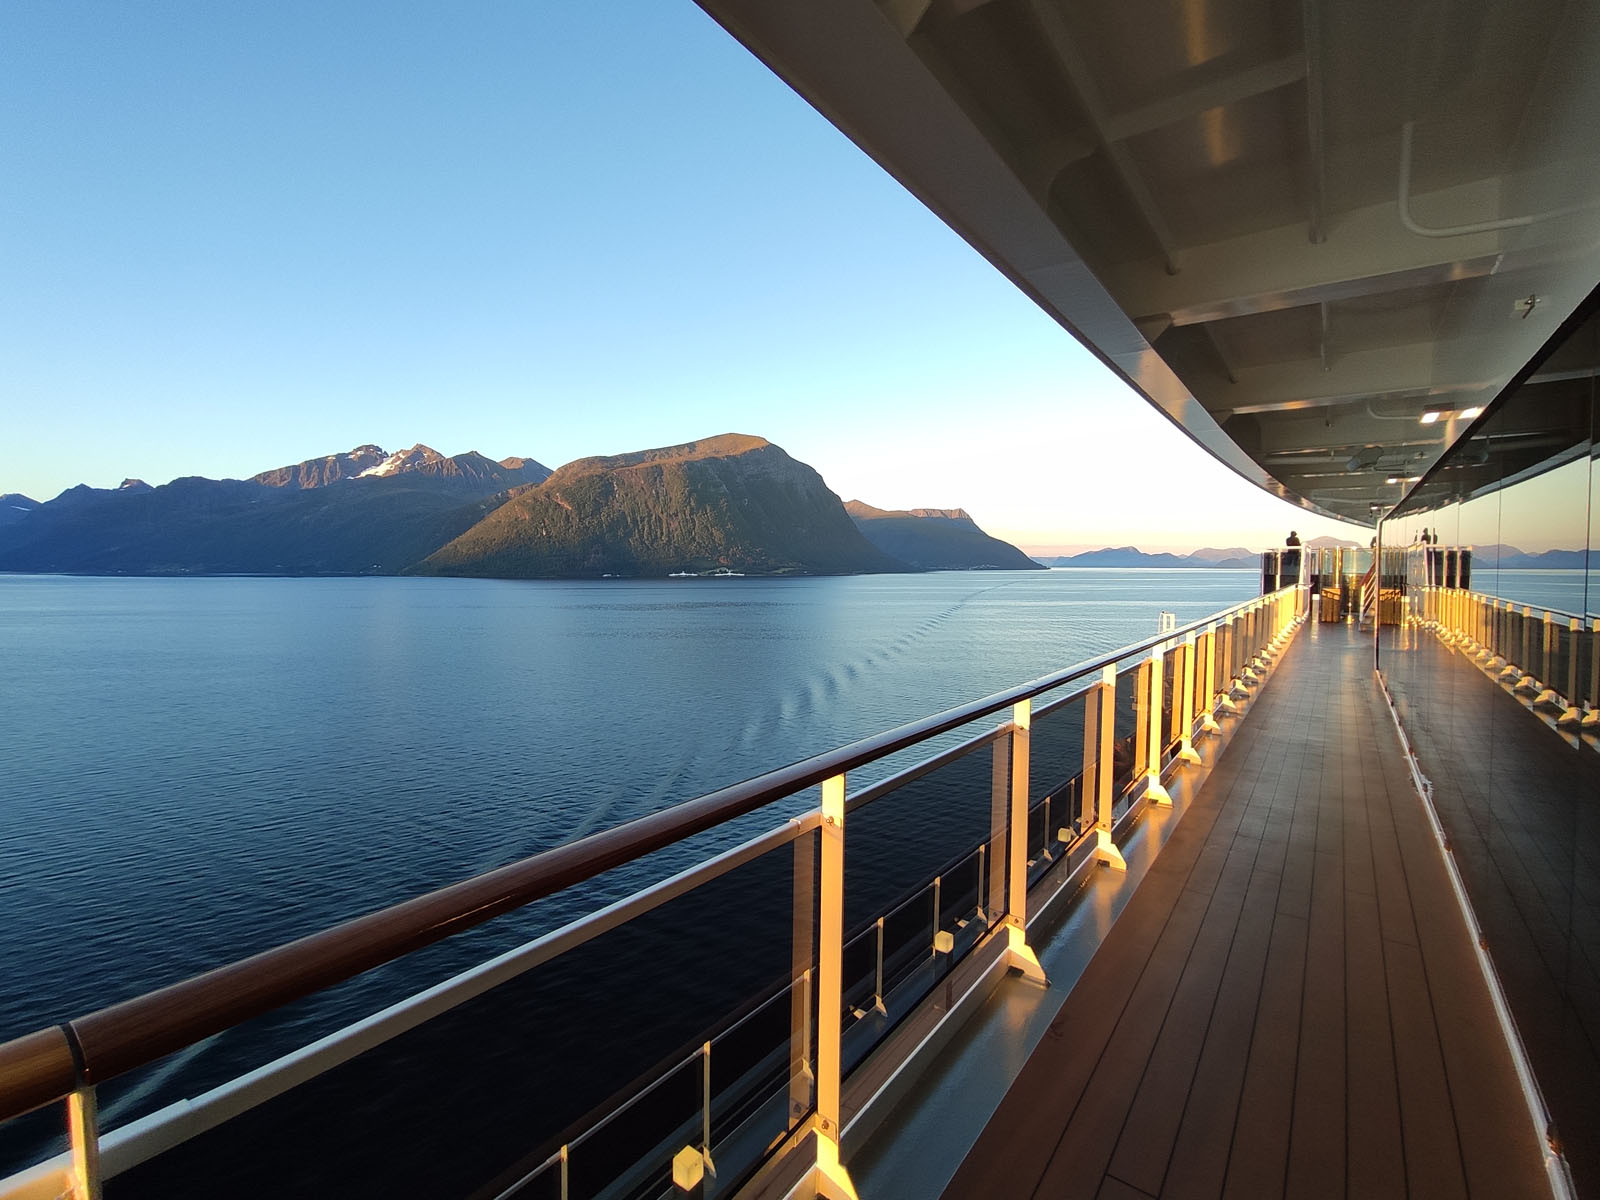 How to Choose Cruises to Norwegian Fjords